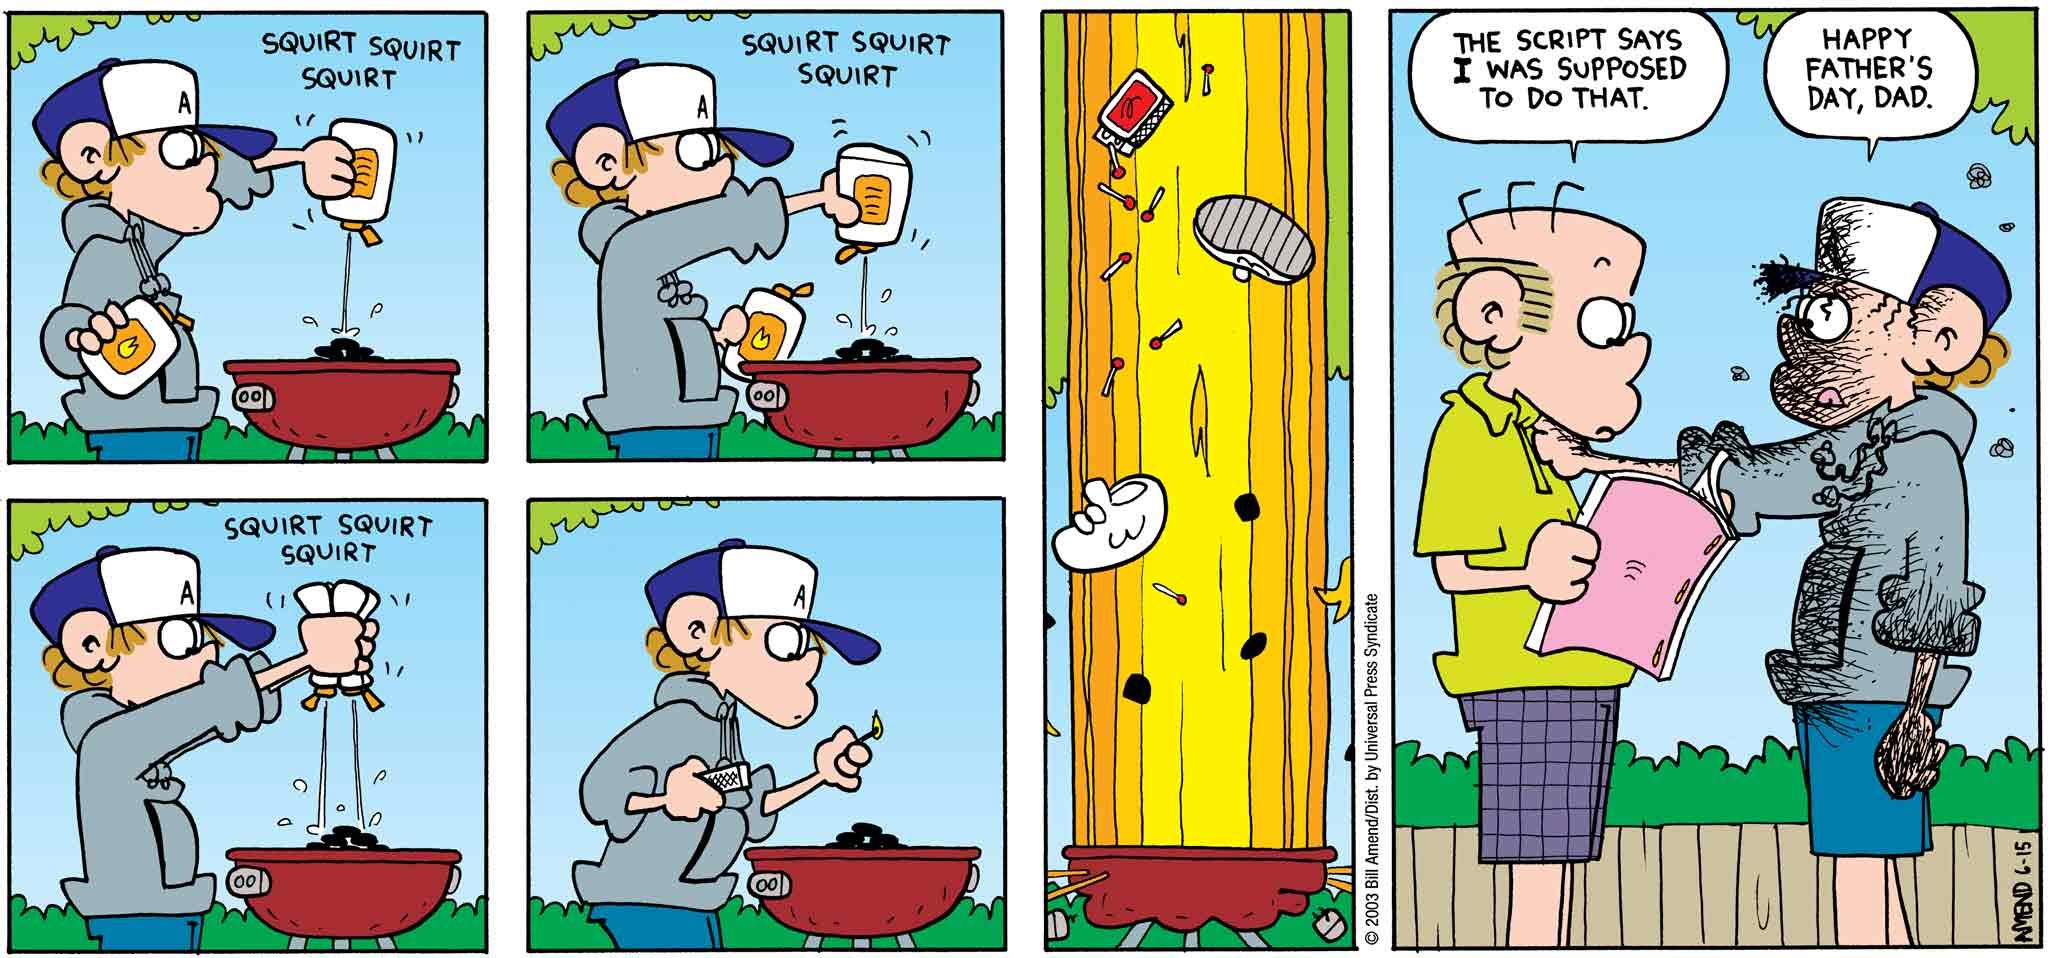 FoxTrot by Bill Amend - Father's Day comic published June 15, 2003 - [Peter over-preps the grill] Roger: The script says I was supposed to do that. Peter: Happy Father's Day, Dad.